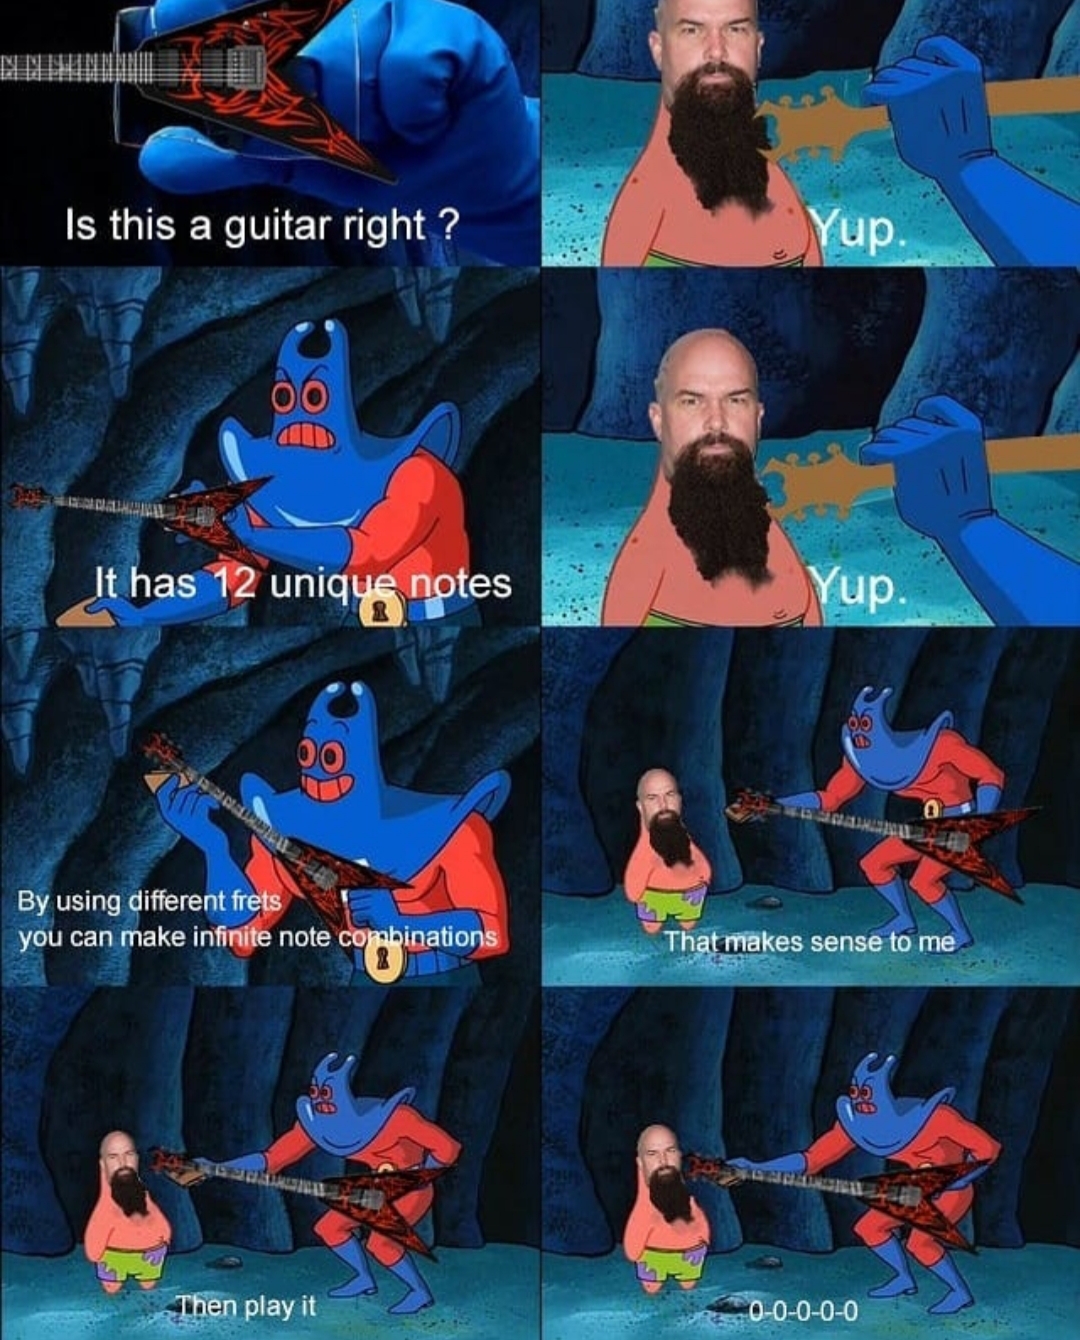 slayer memes de megadeth - Is this a guitar right? up 0 0 It has 12 uniqus notes Yup. By using different frets you can make infinite note cosinations That makes sense to me Then playa 00000